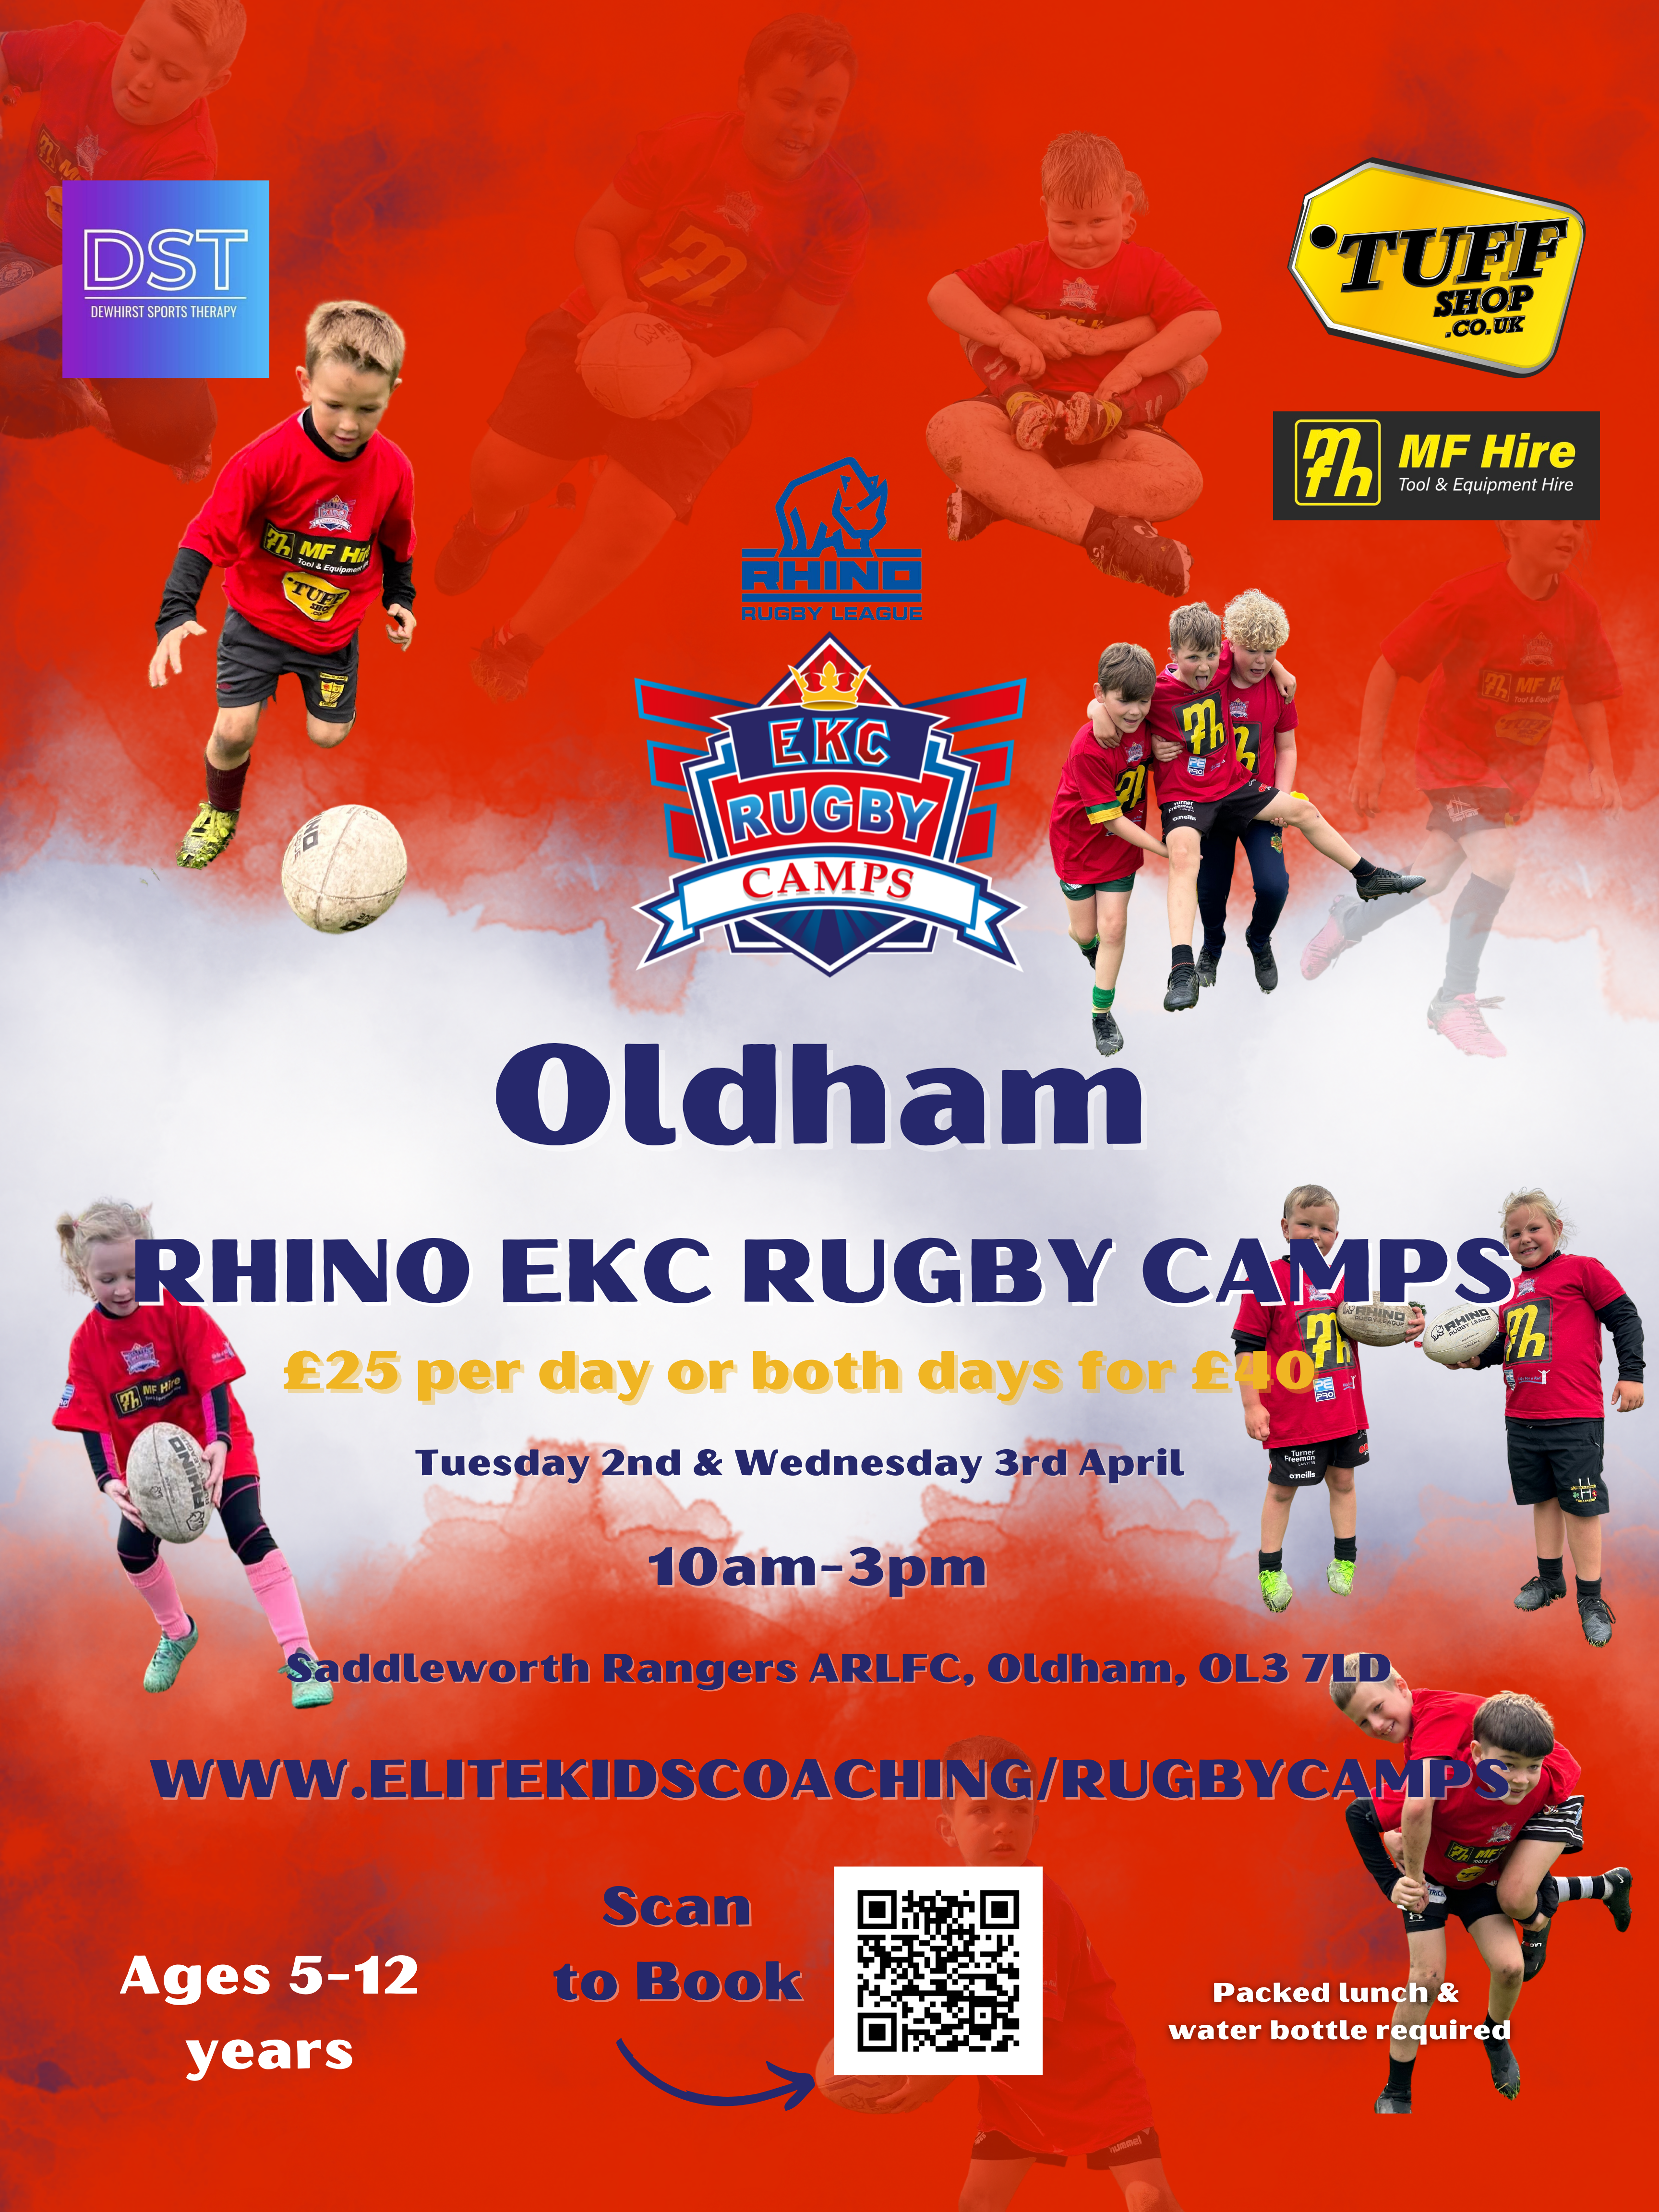 Oldham Rhino EKC Rugby Camp Tuesday 2nd April